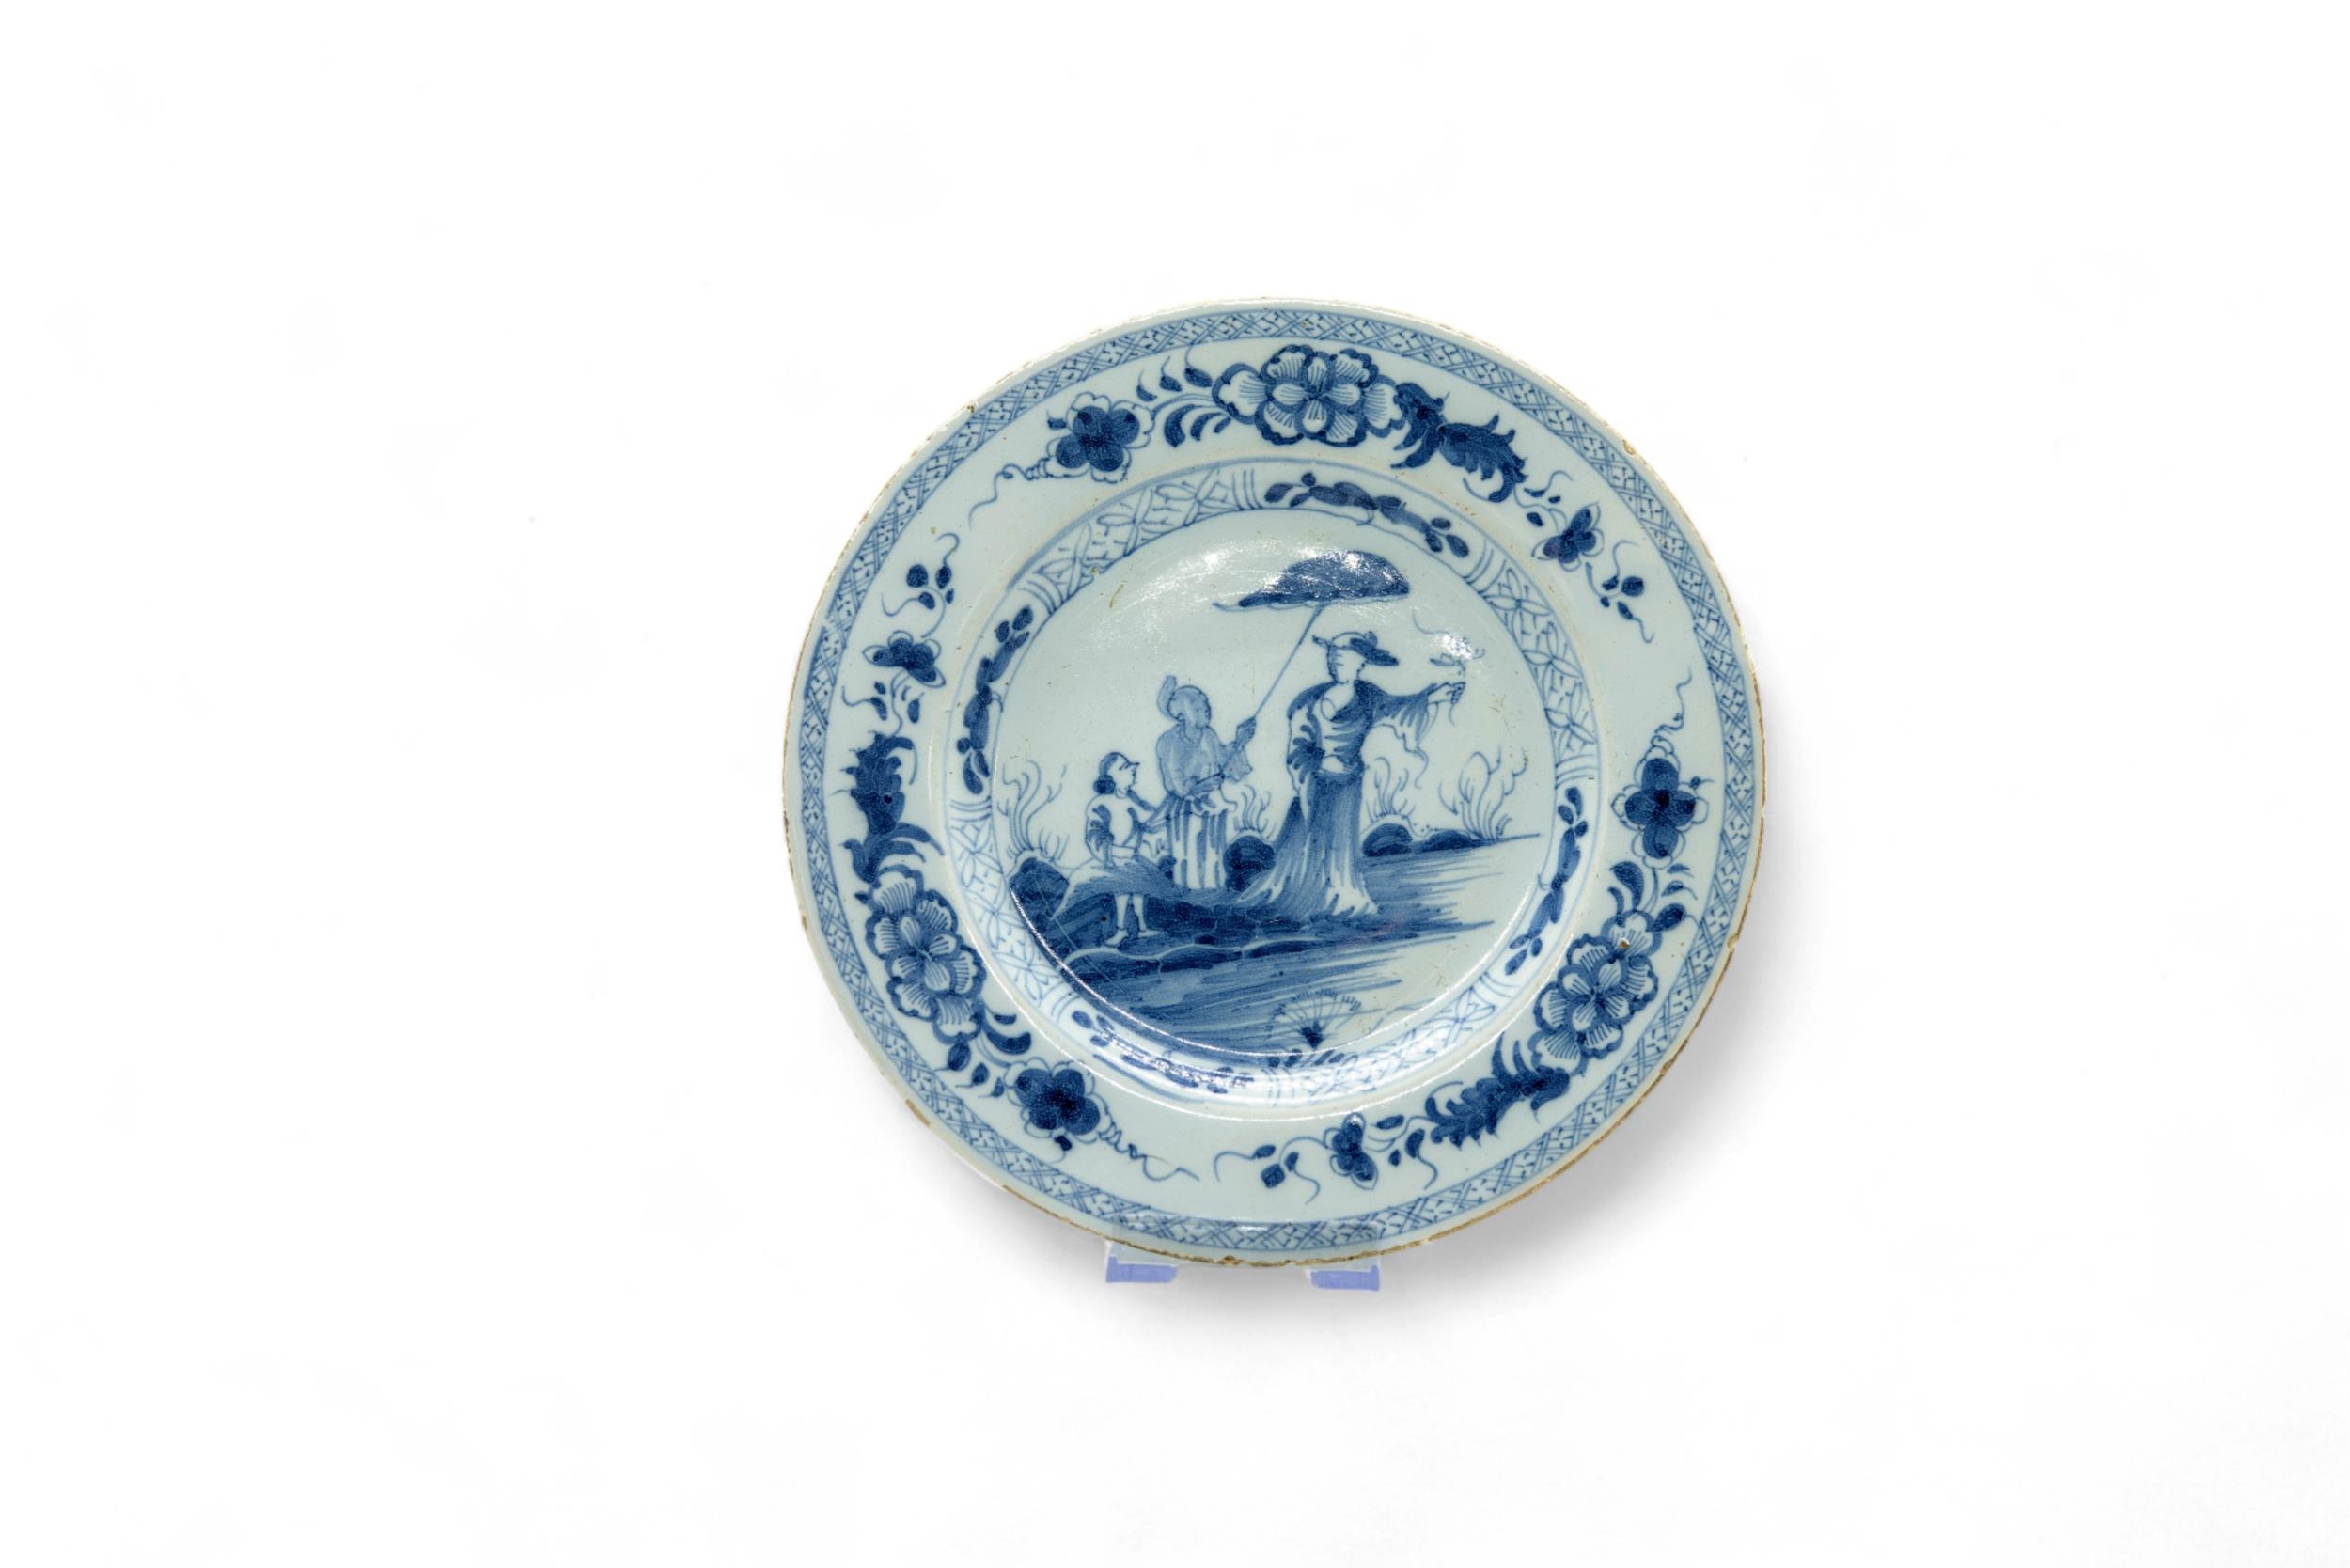 FIVE DELFT PLATES AND A SOUP PLATE 18th century, 23cms wide - Image 6 of 6